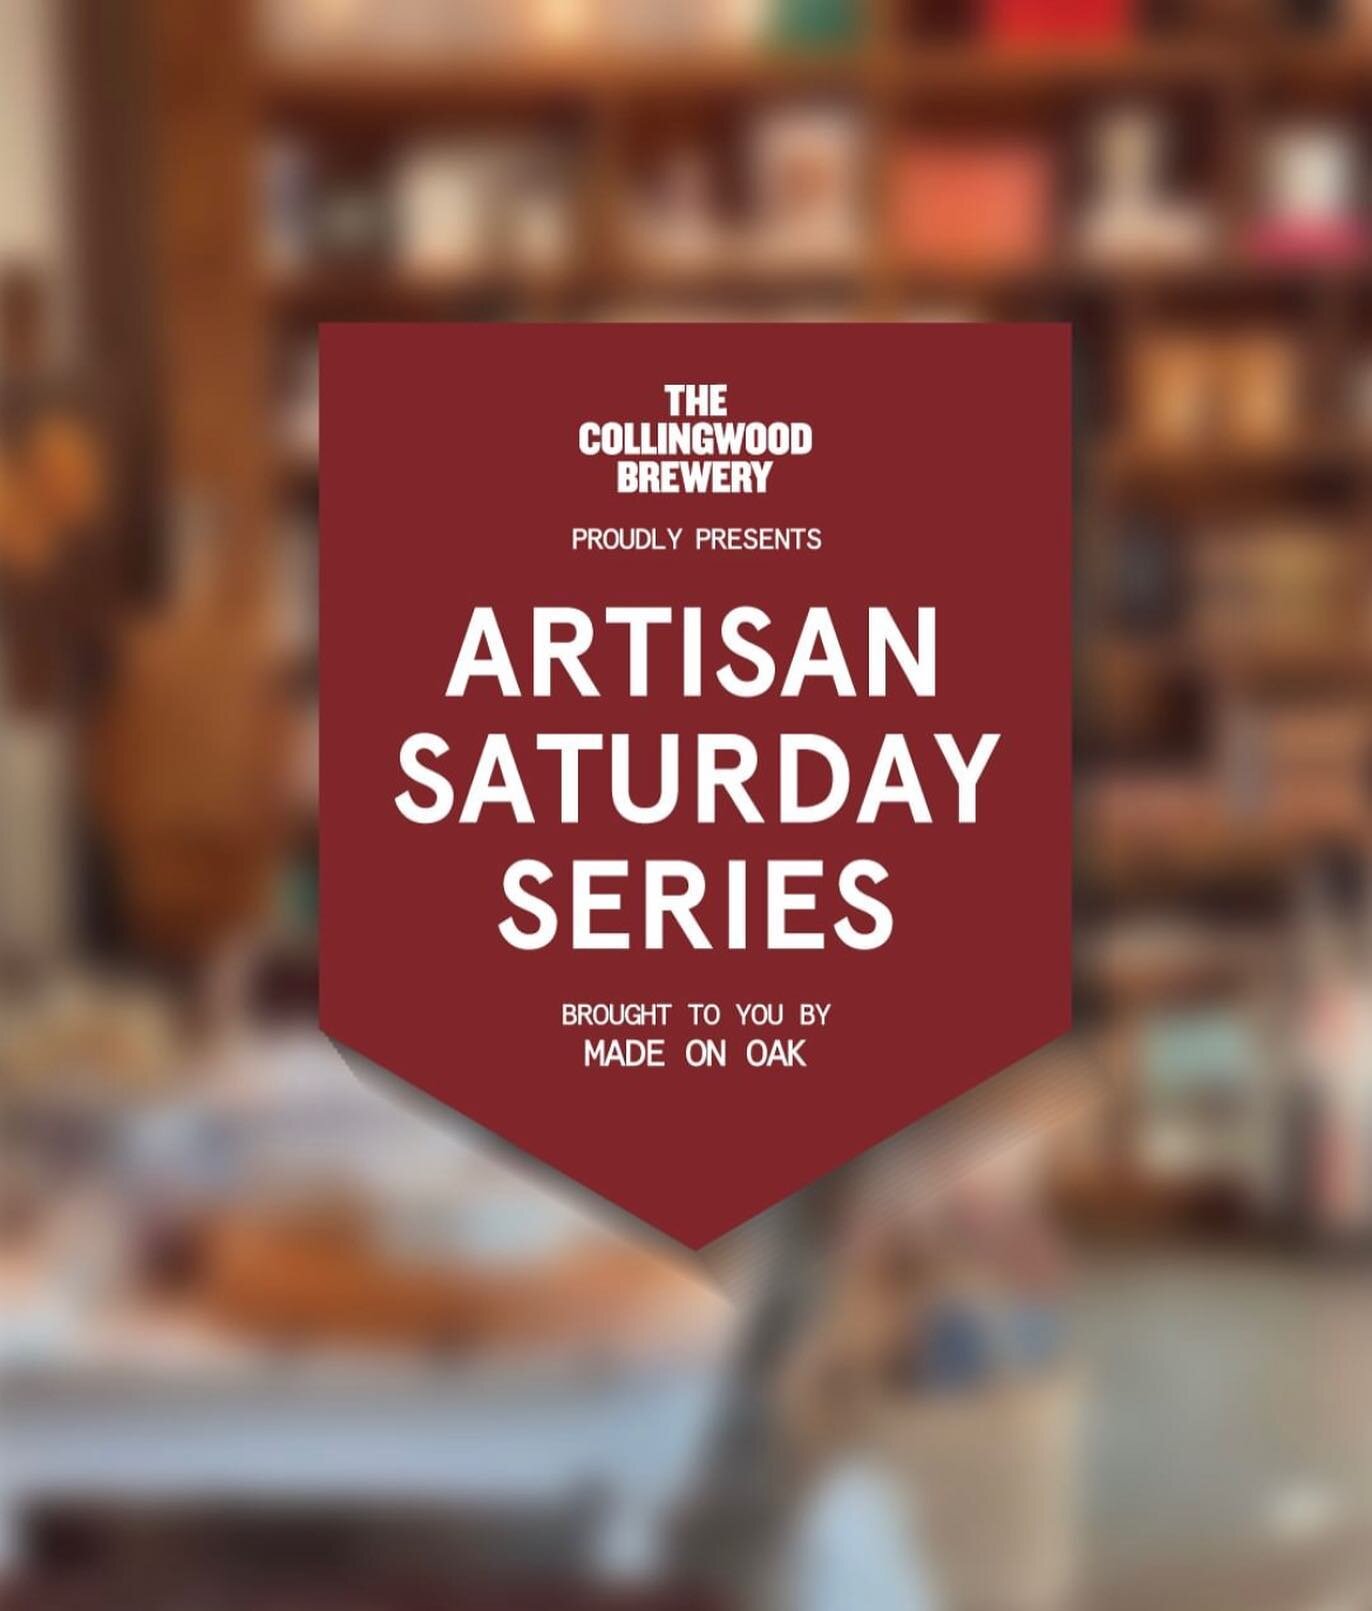 We are super excited about our new Artisan Series hosted by @thecollingwoodbrewery! 
Each Saturday features a different artisan who will be set up with their goods from 12-7pm. 
Jan 7th @soniafayejewellery 
Jan 14th @dirty_leather_work 
Jan 21st @mdm